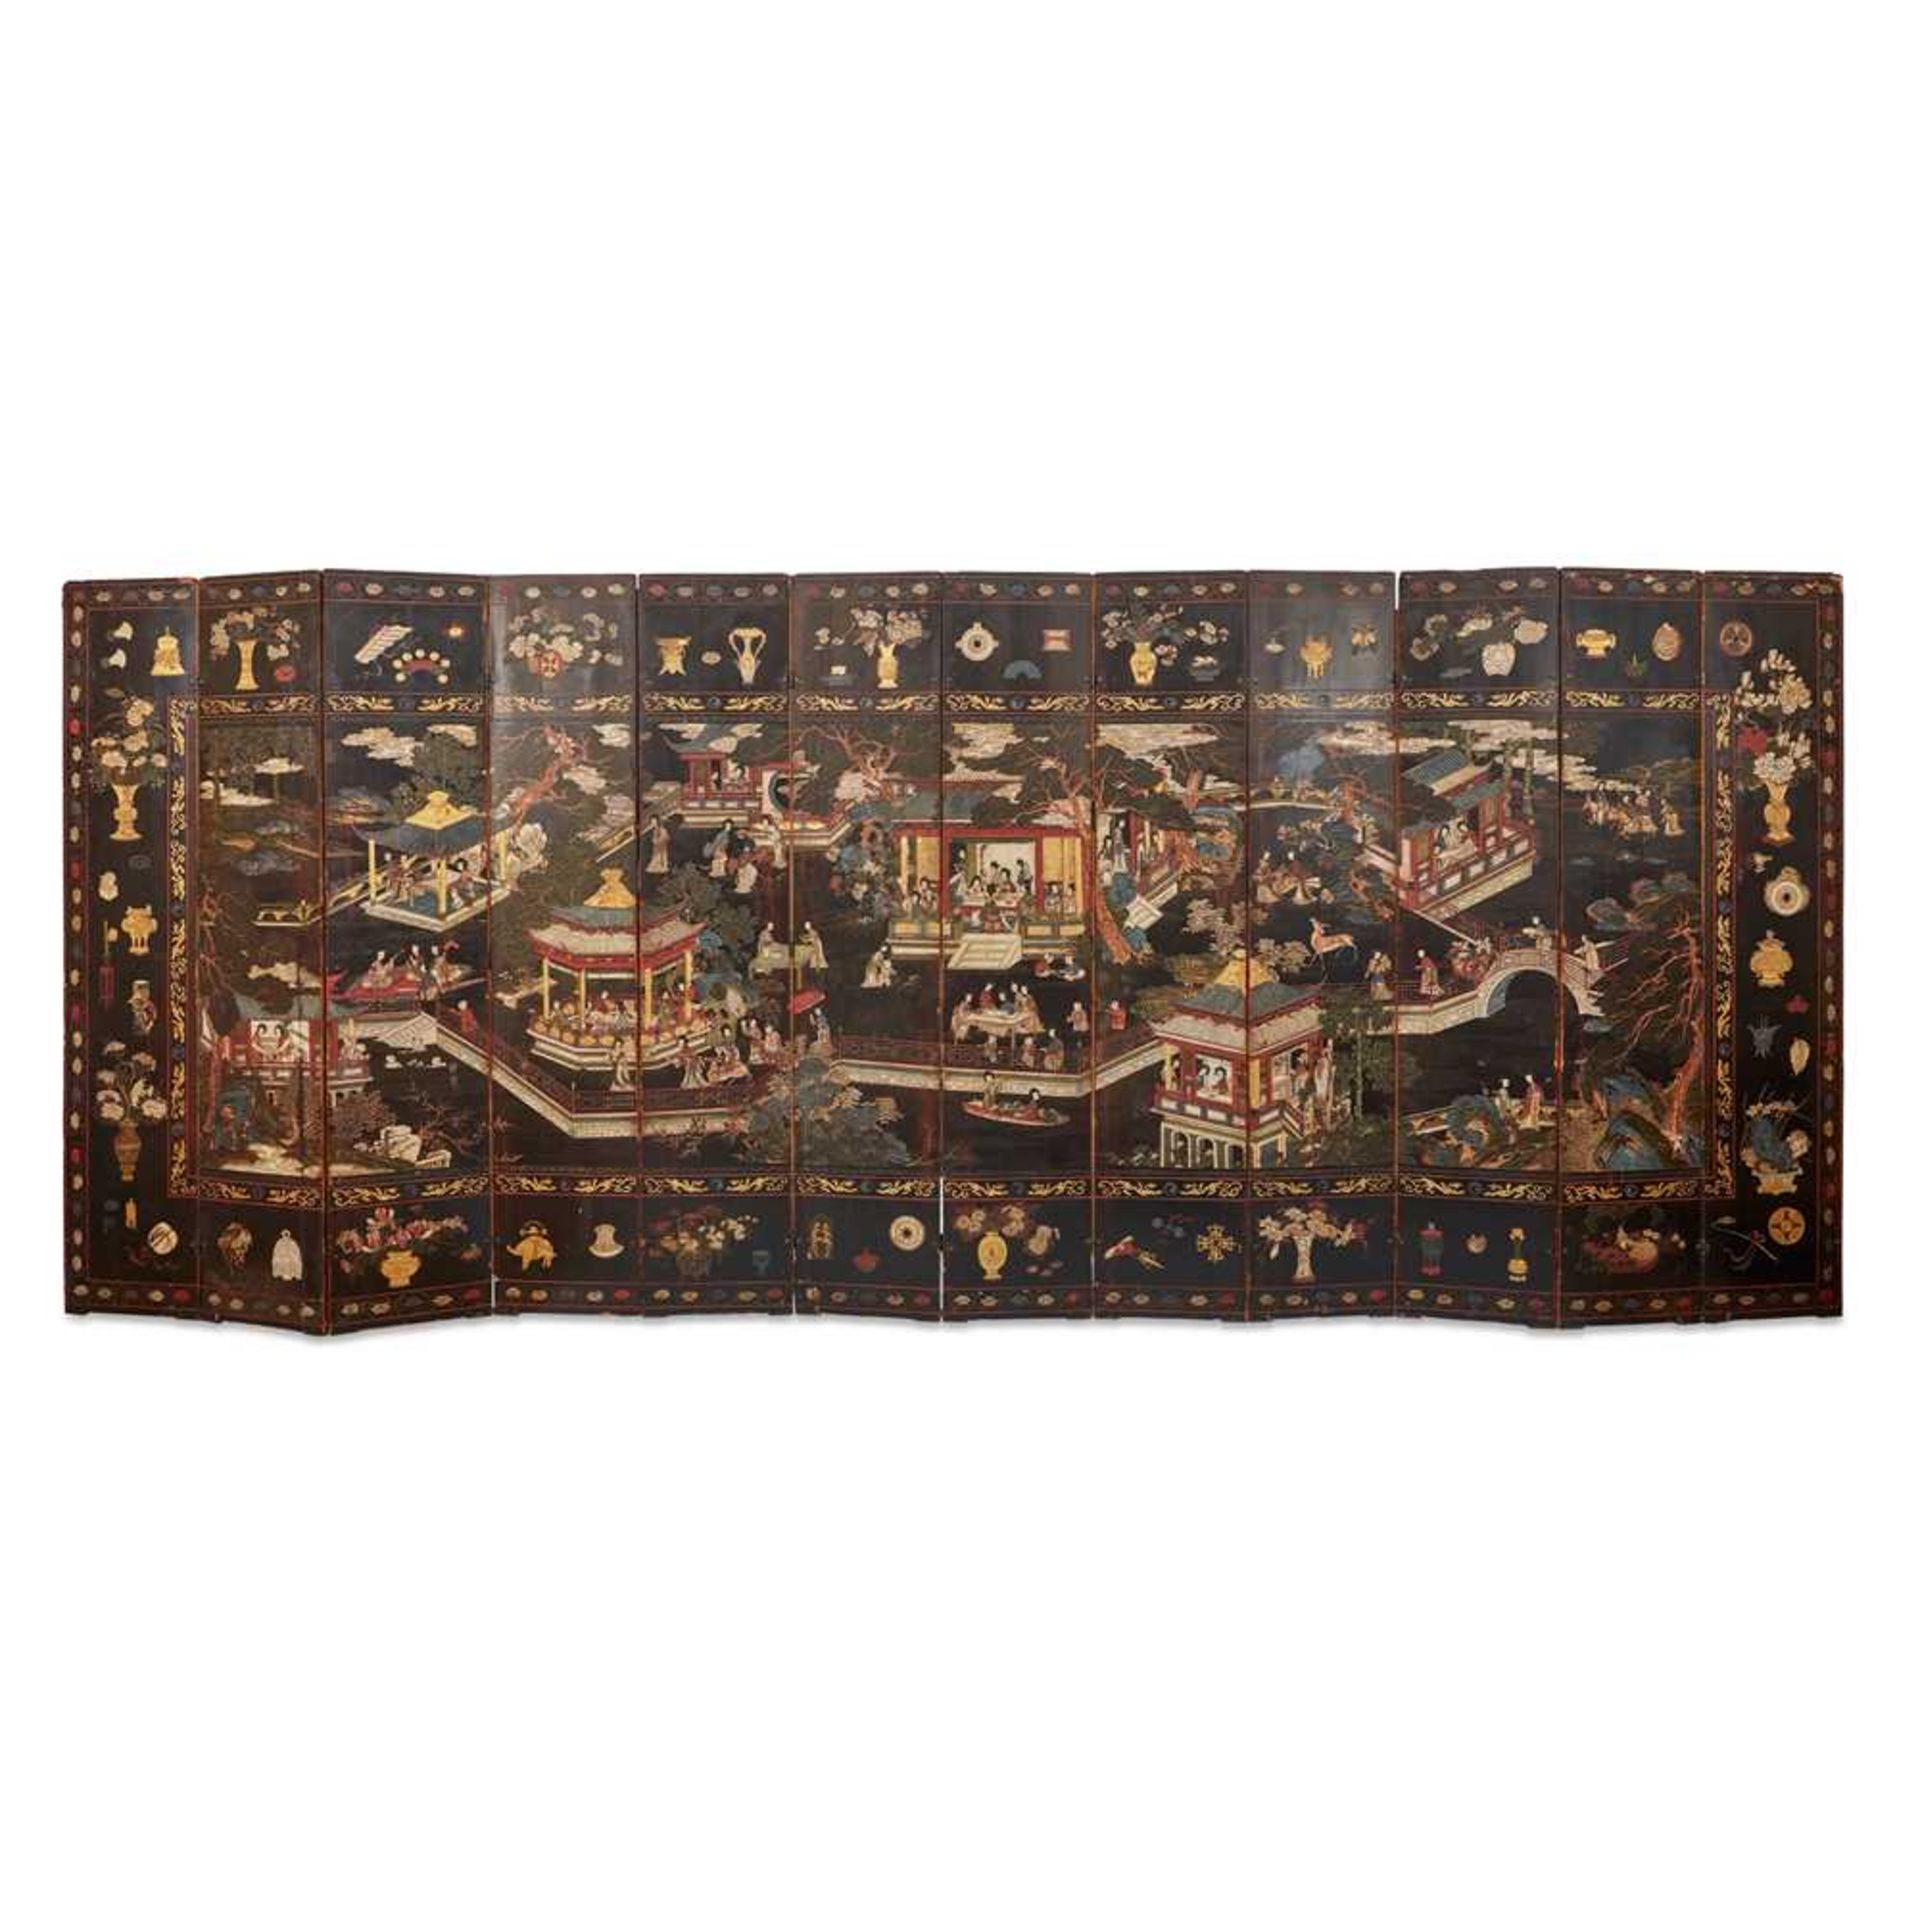 A CHINESE COROMANDEL BLACK LACQUER TWELVE-PANEL SCREEN QING DYNASTY, 18TH CENTURY - Image 3 of 72